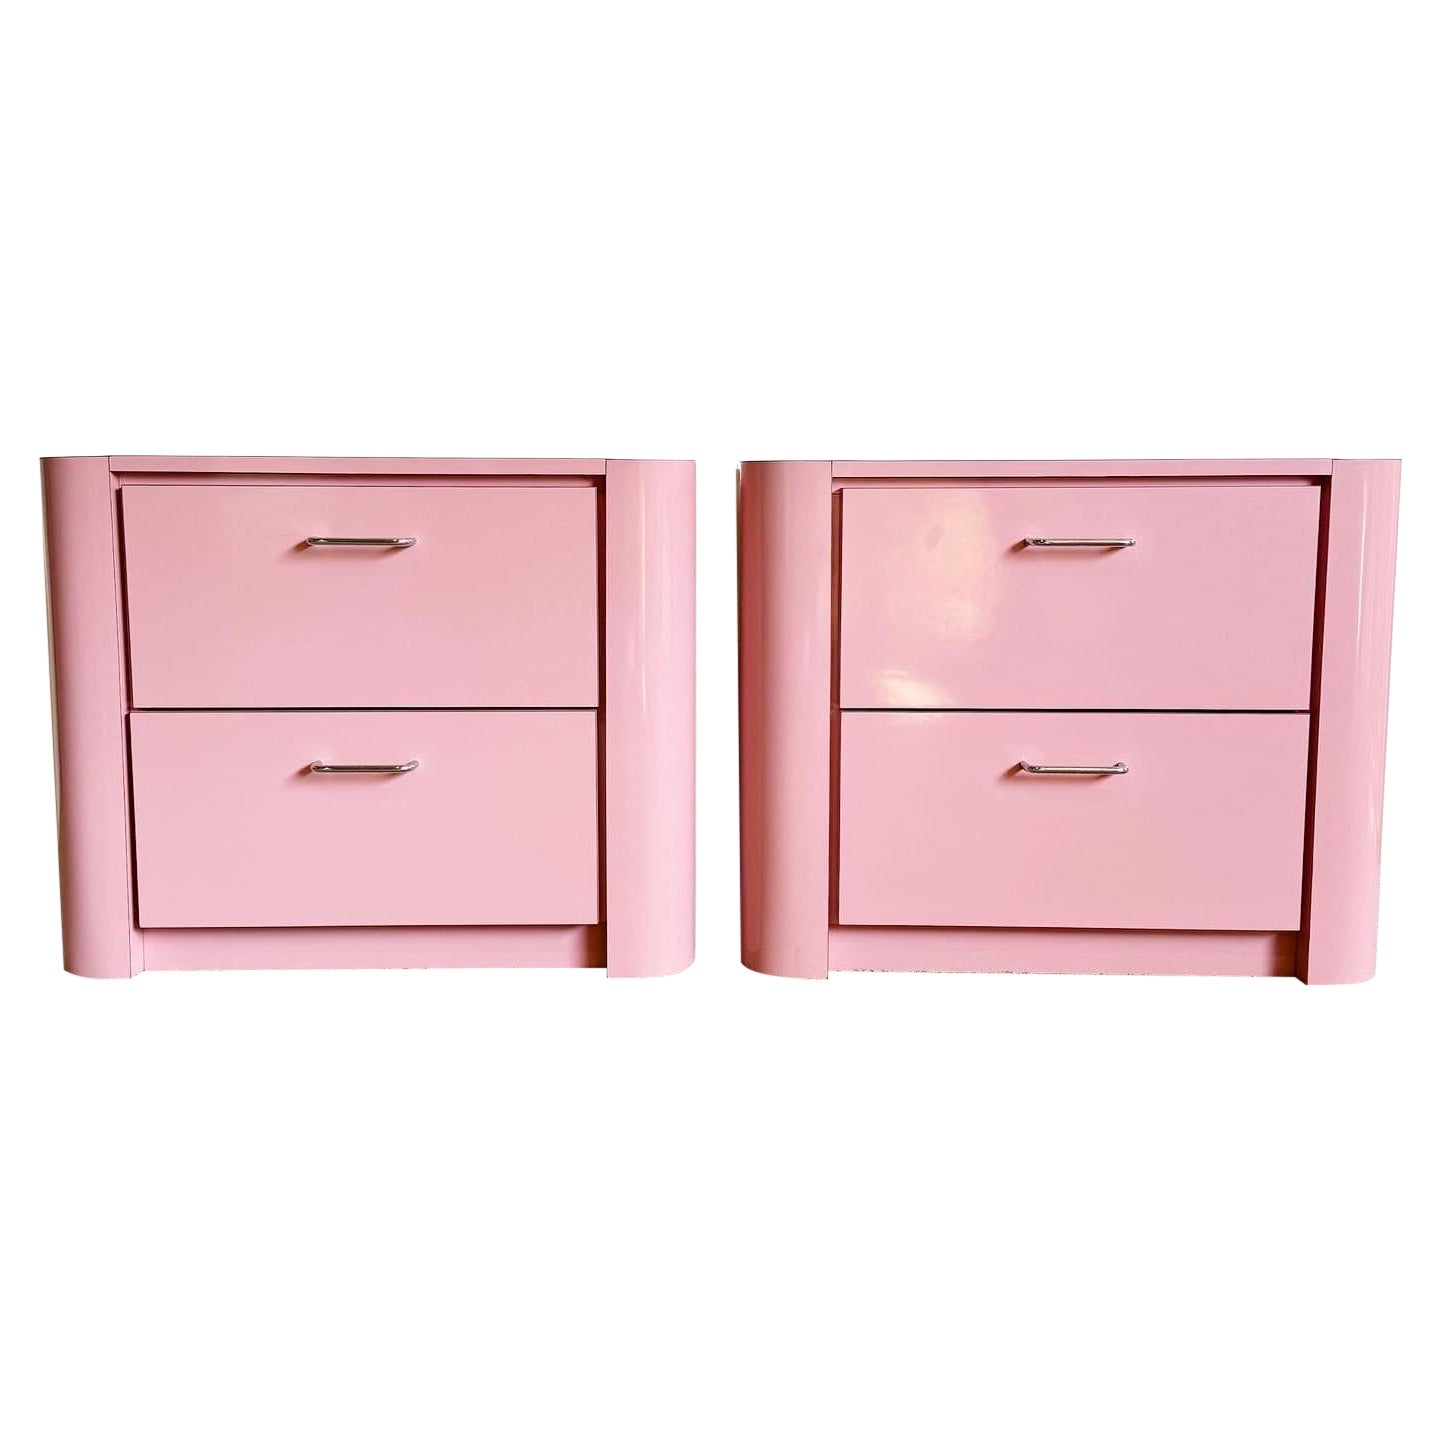 Postmodern Pink Lacquer Laminate Nightstands With Chrome Handles - a Pair For Sale